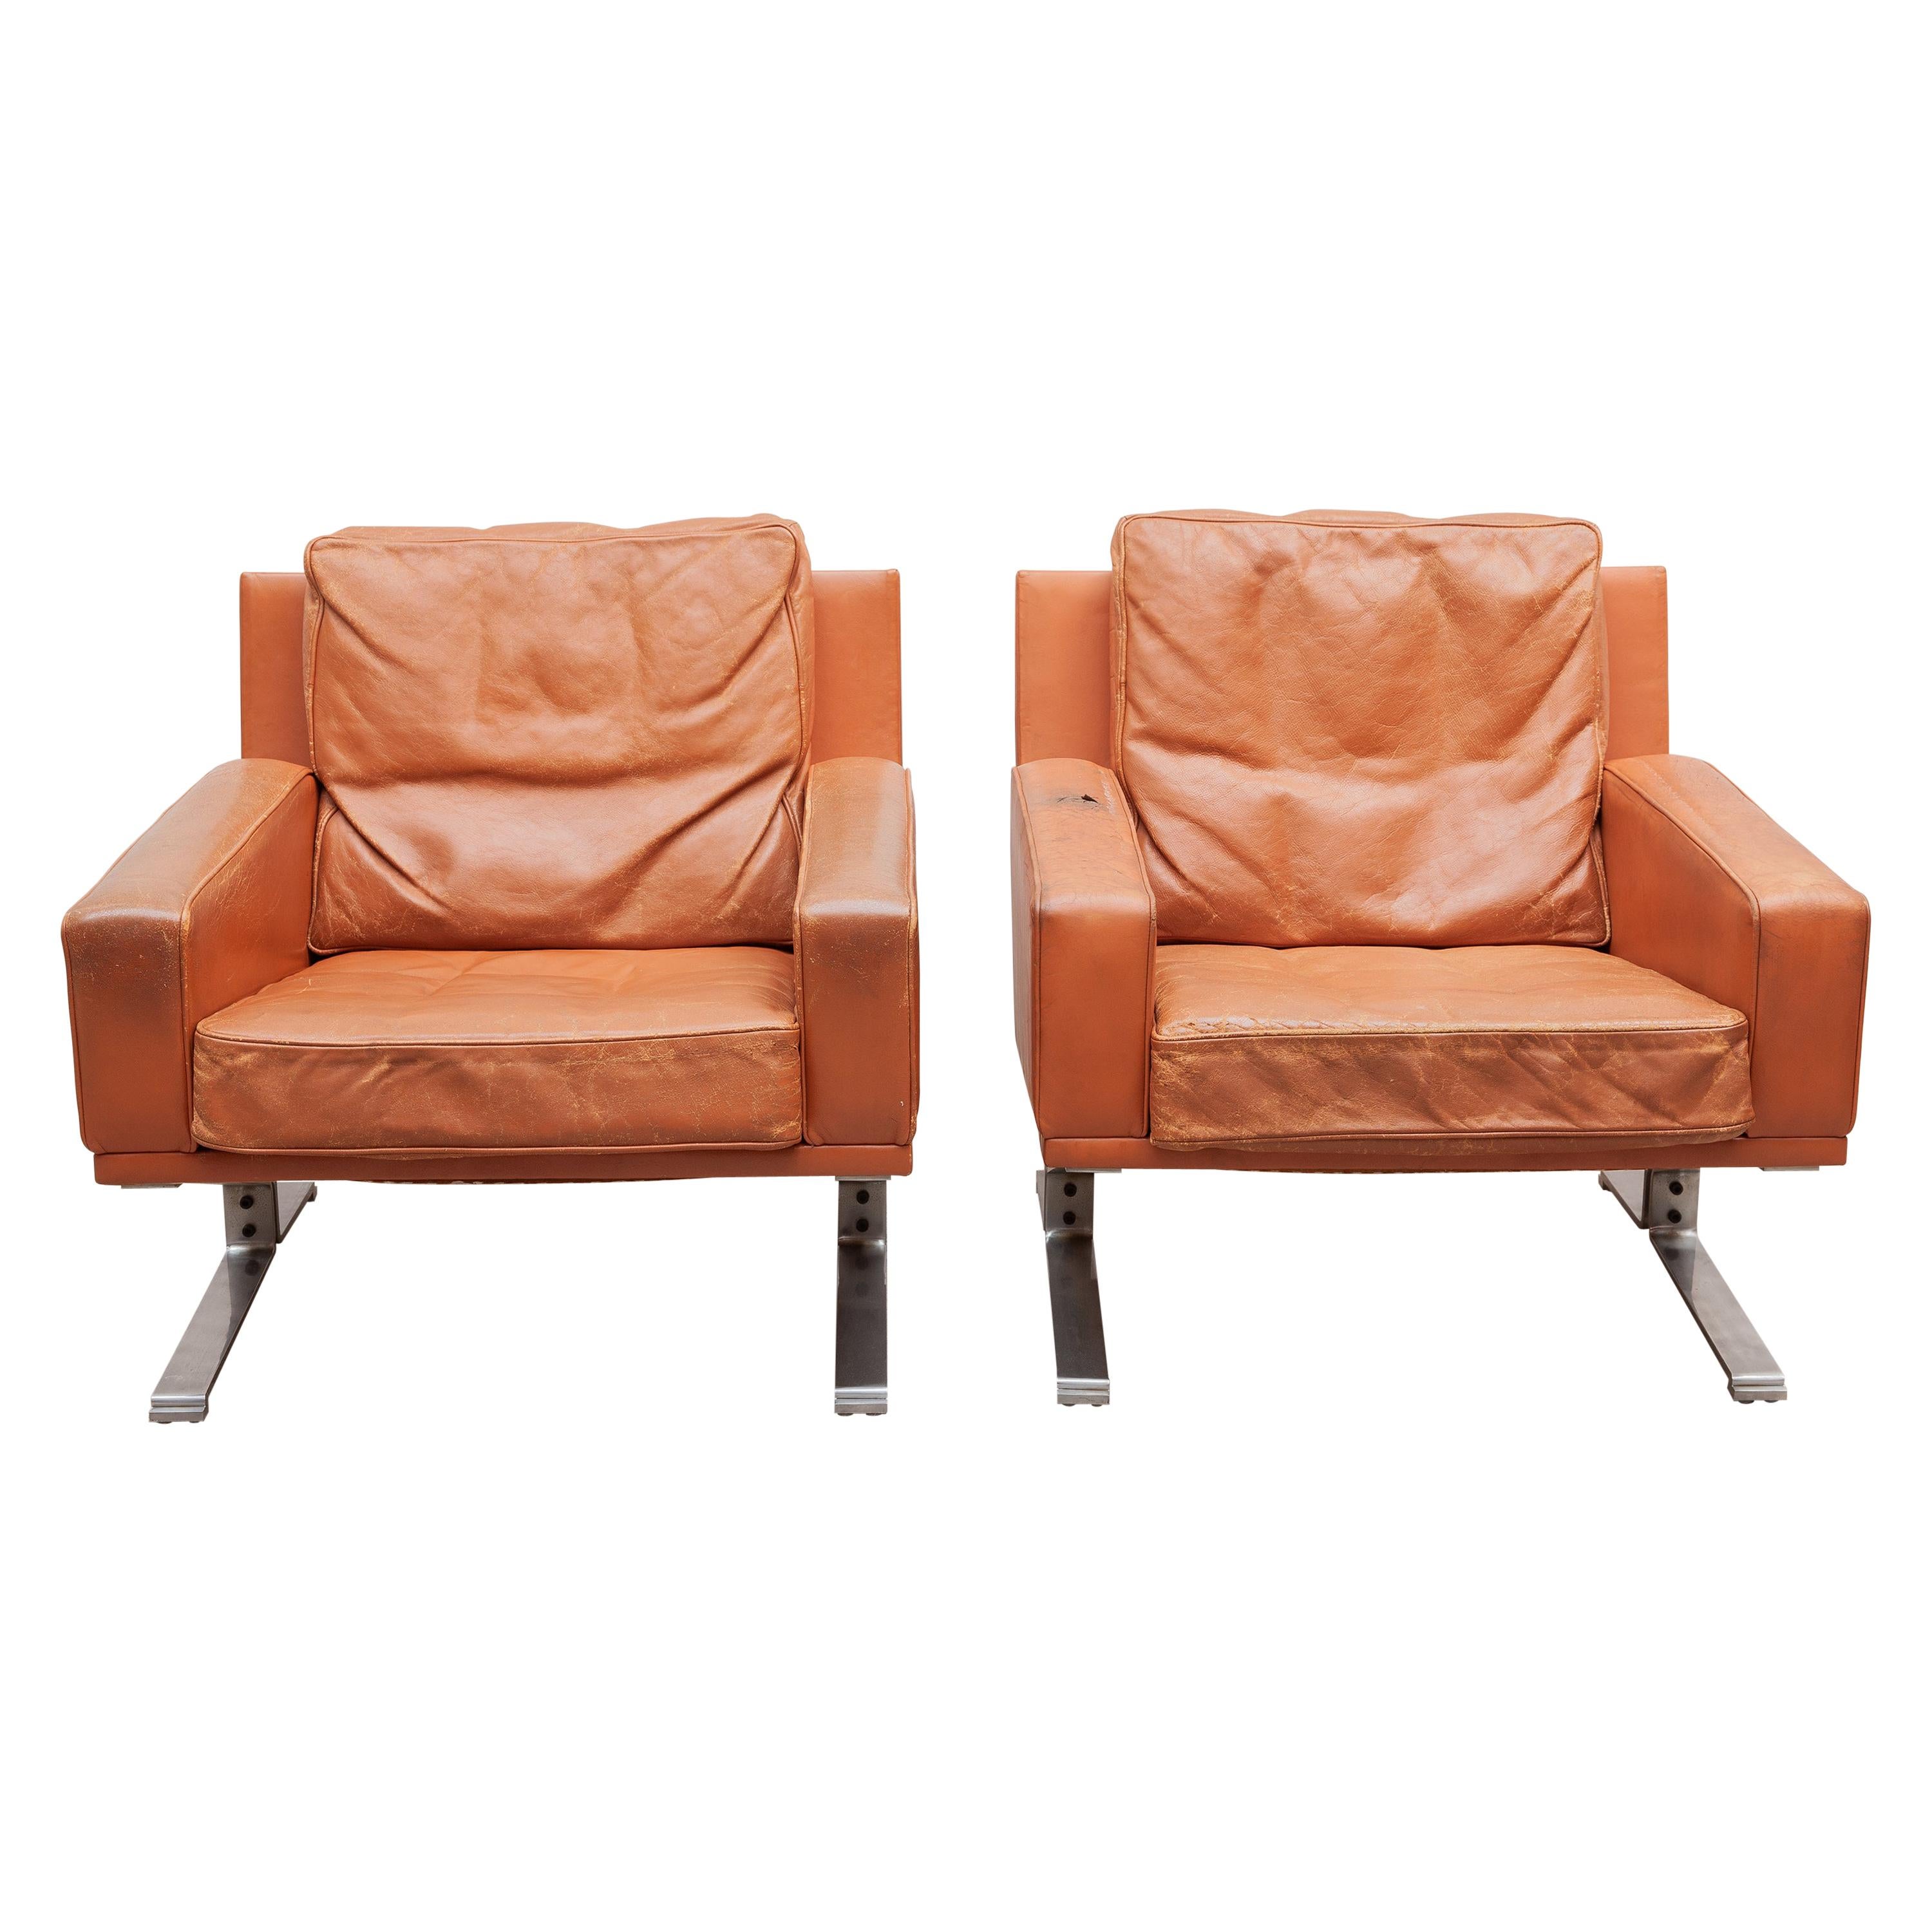 Mid-Century Modern Cognac Leather Club Chairs 1960s with a Nice Patina